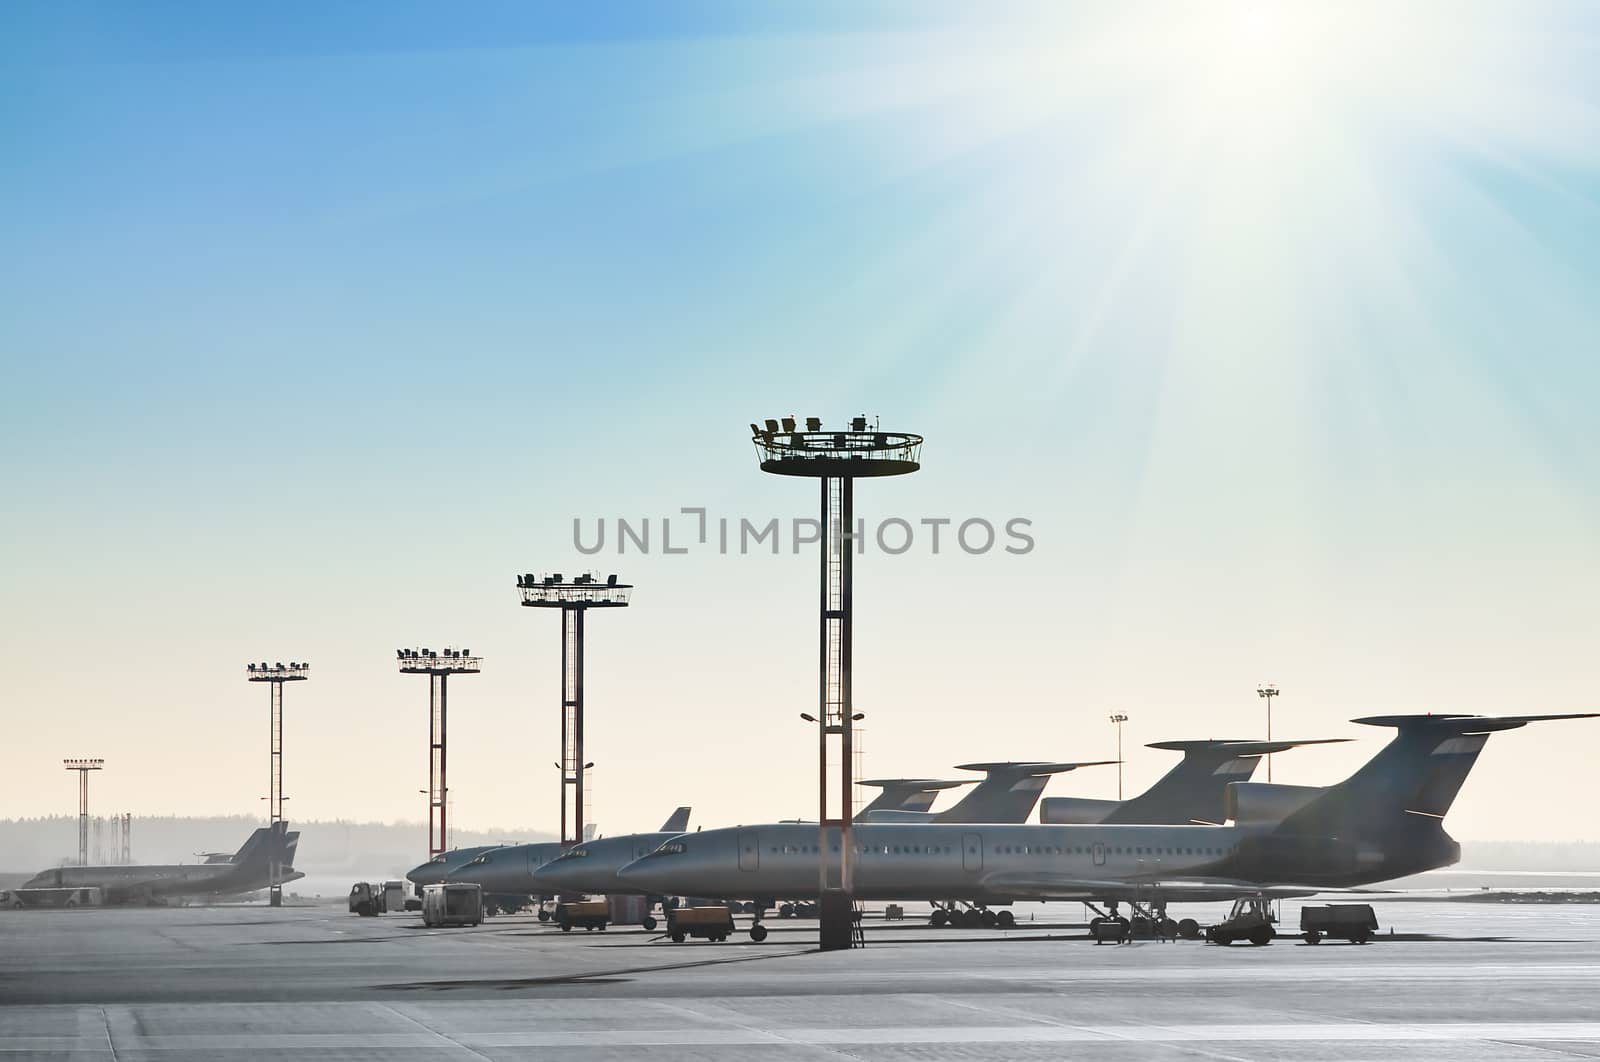 Planes on the runway  by zeffss